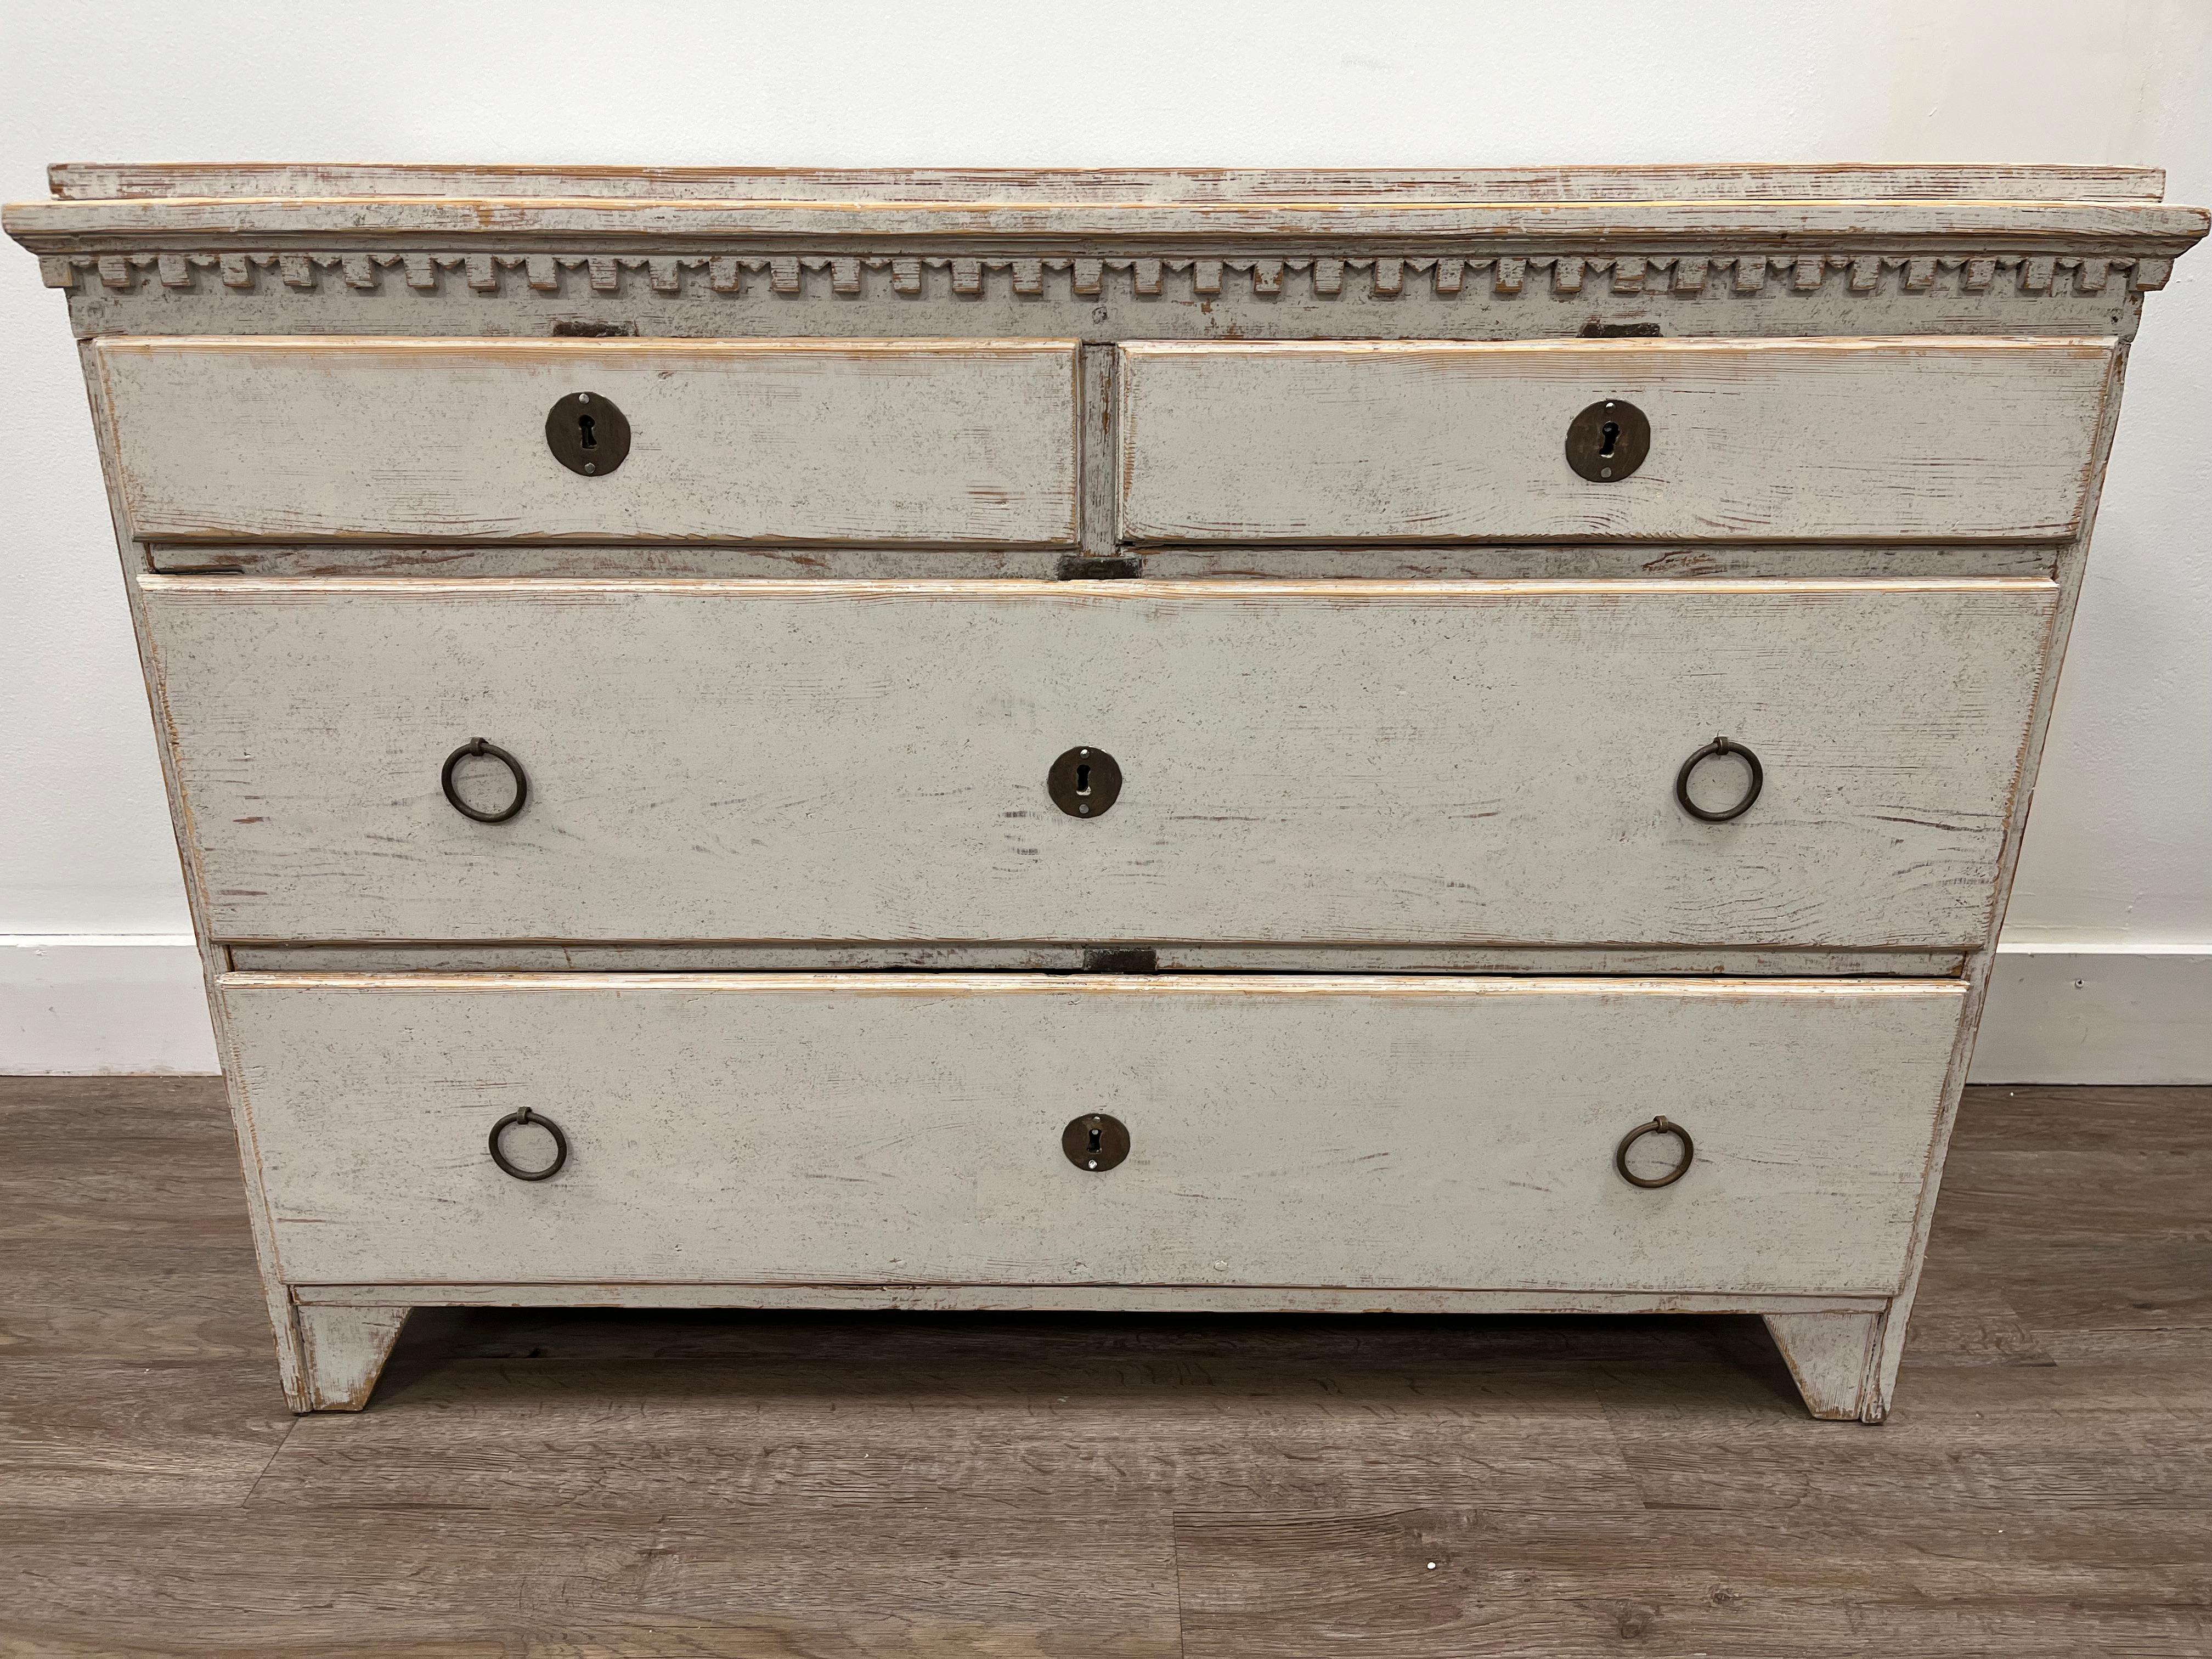 A low provincial Late Gustavian chest of drawers with later iron hardware and original locks. Repainted in light grey. Dental frieze top over two small and two large drawers. 